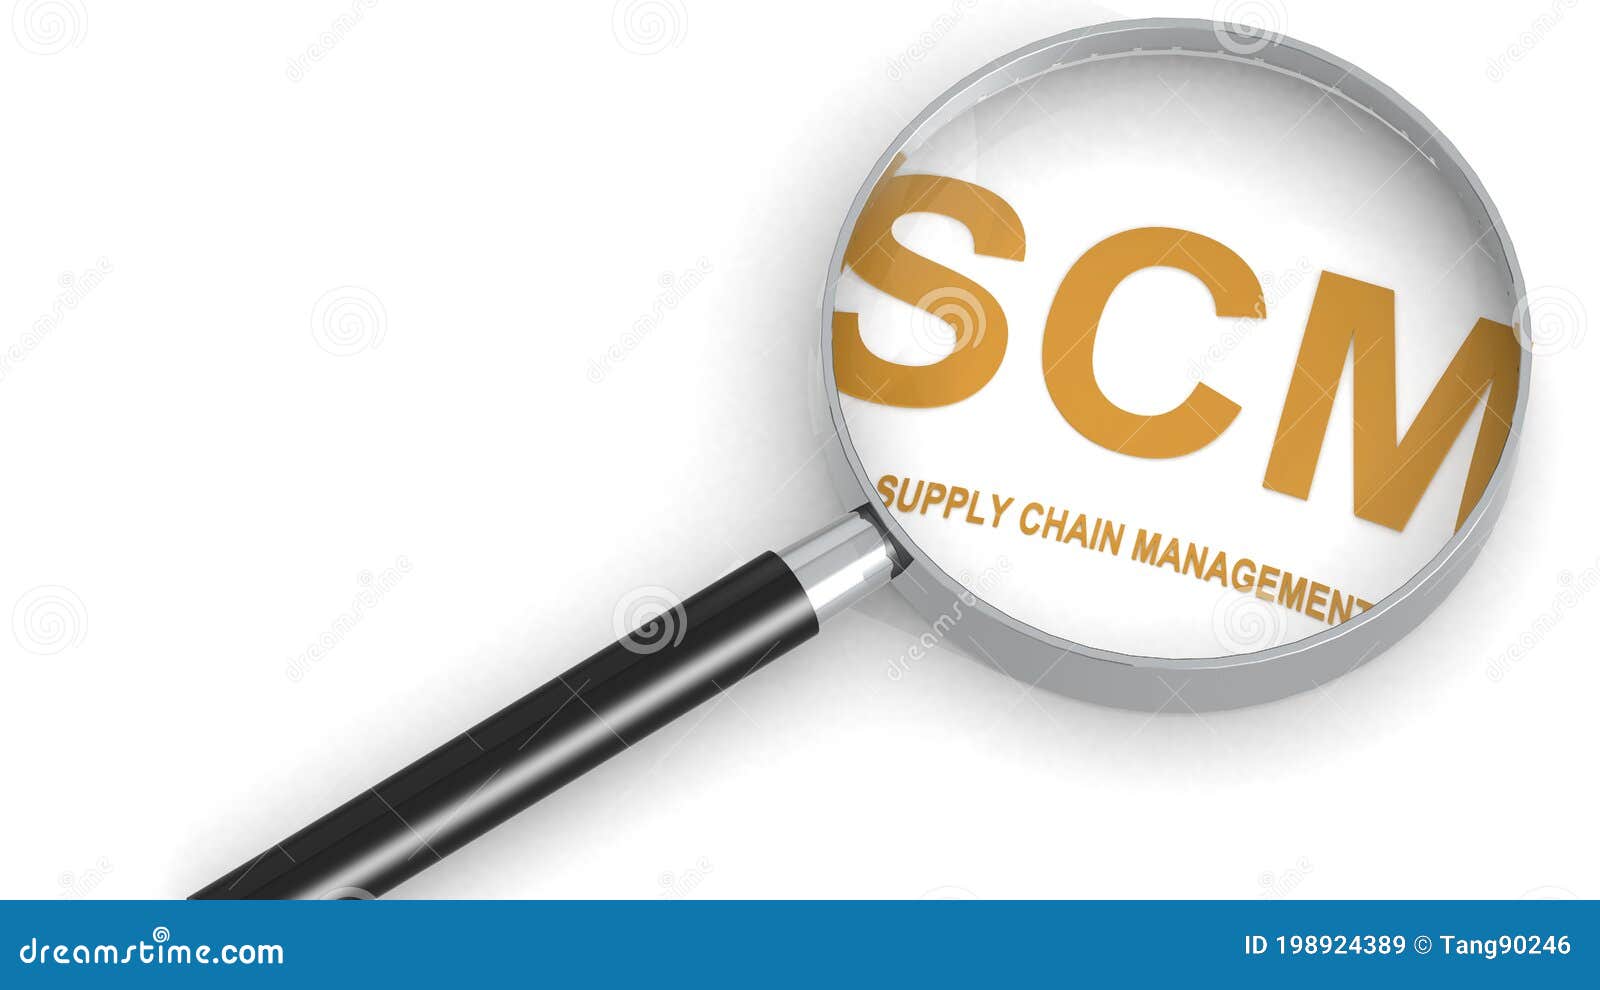 Scm Supply Chain Management Word Under Magnifying Glass Stock